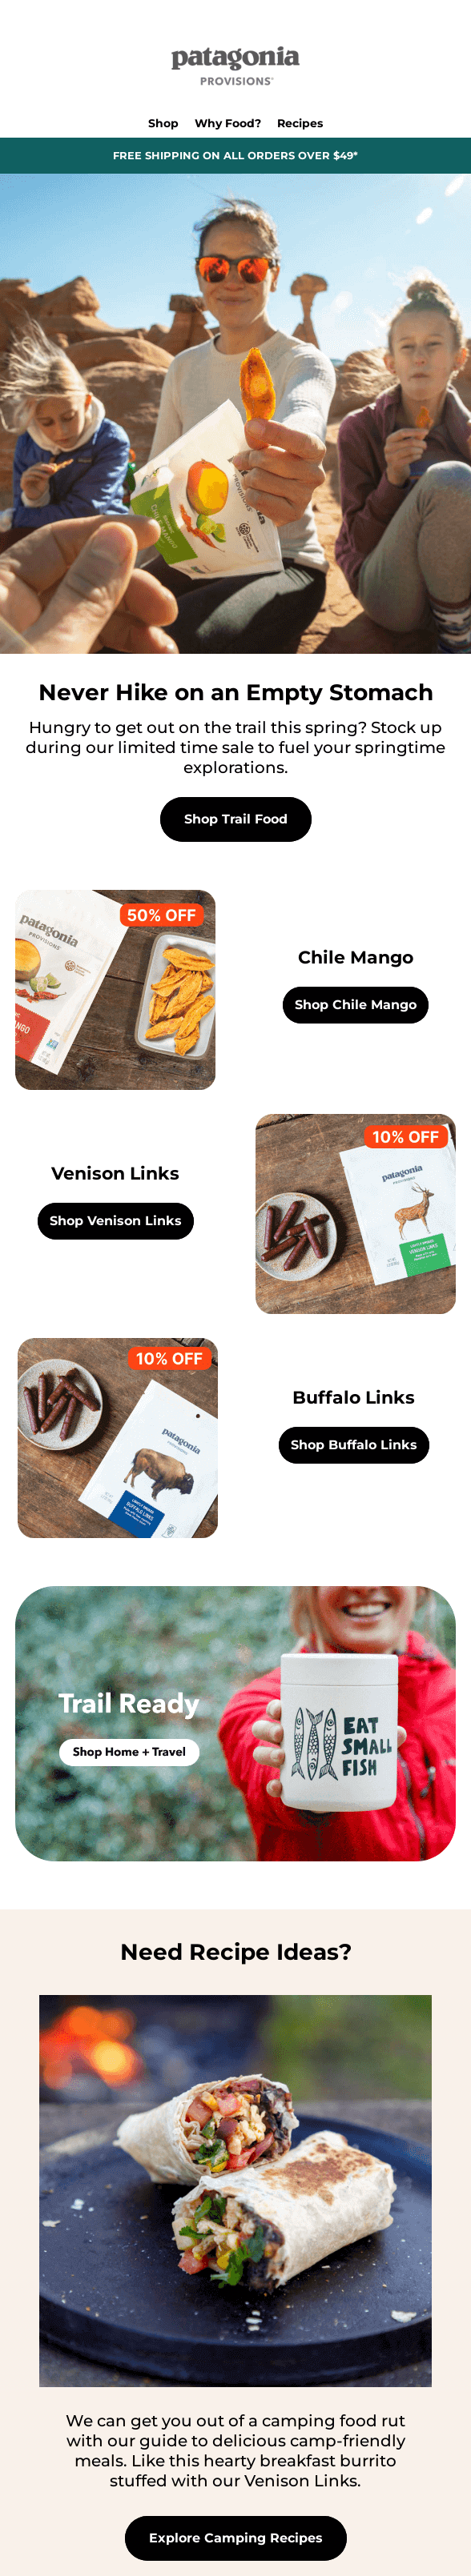 Patagonia Provisions features Chile Mango, Venison Links, and Buffalo Links in an email, urging subscribers not to hike on an empty stomach. They also share a guide of camping-friendly meals based on their products and provide a link to other items in their online store.